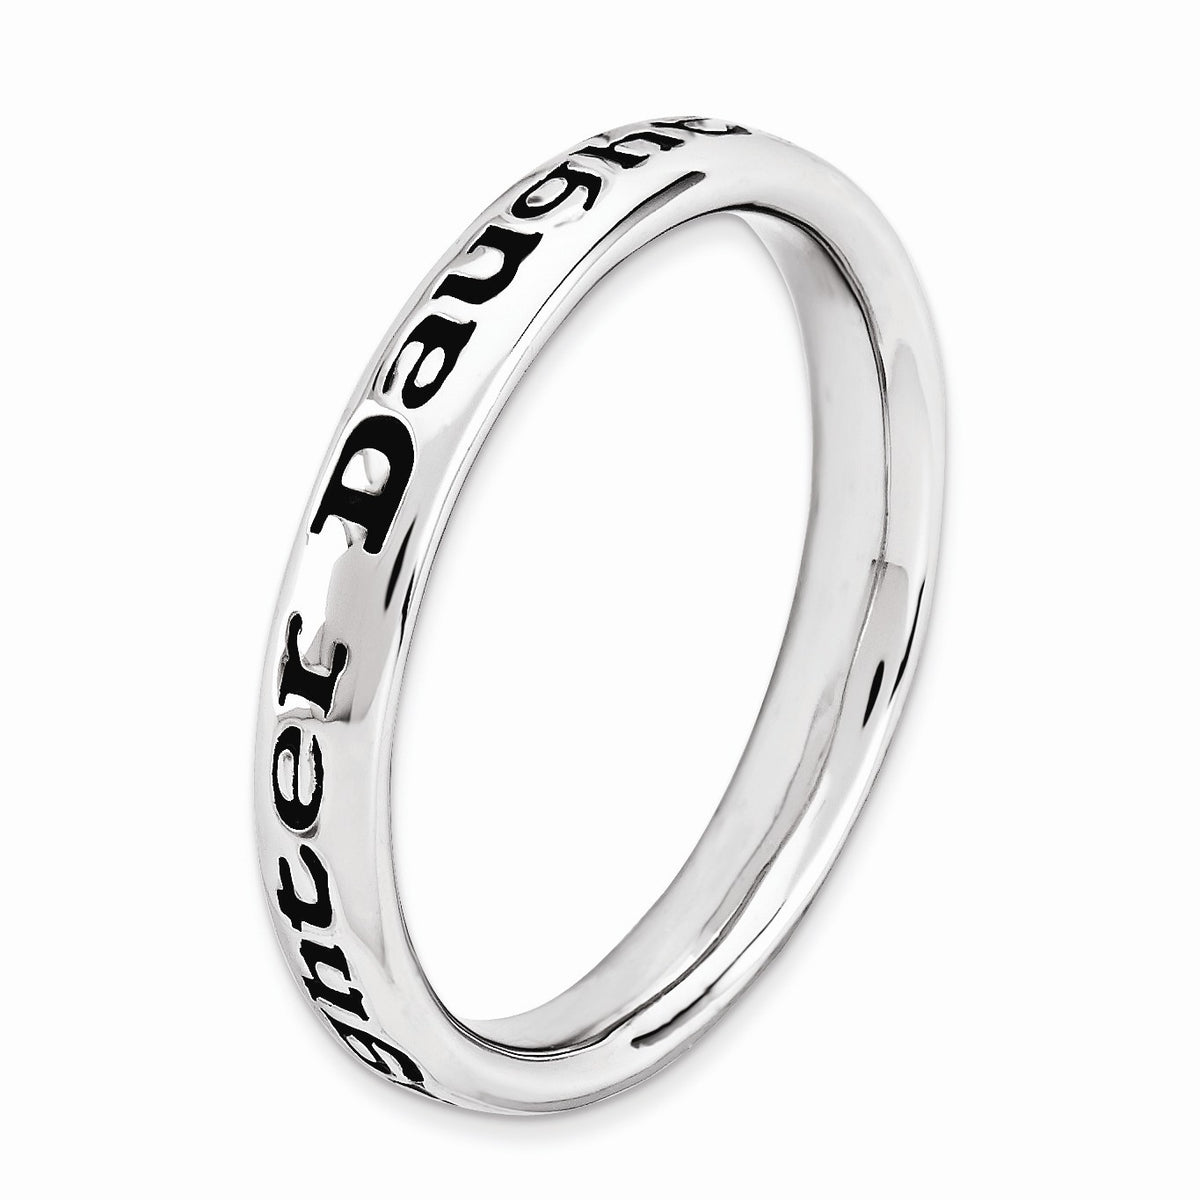 Alternate view of the 3.5mm Sterling Silver Stackable Black Enamel Daughter Script Band by The Black Bow Jewelry Co.